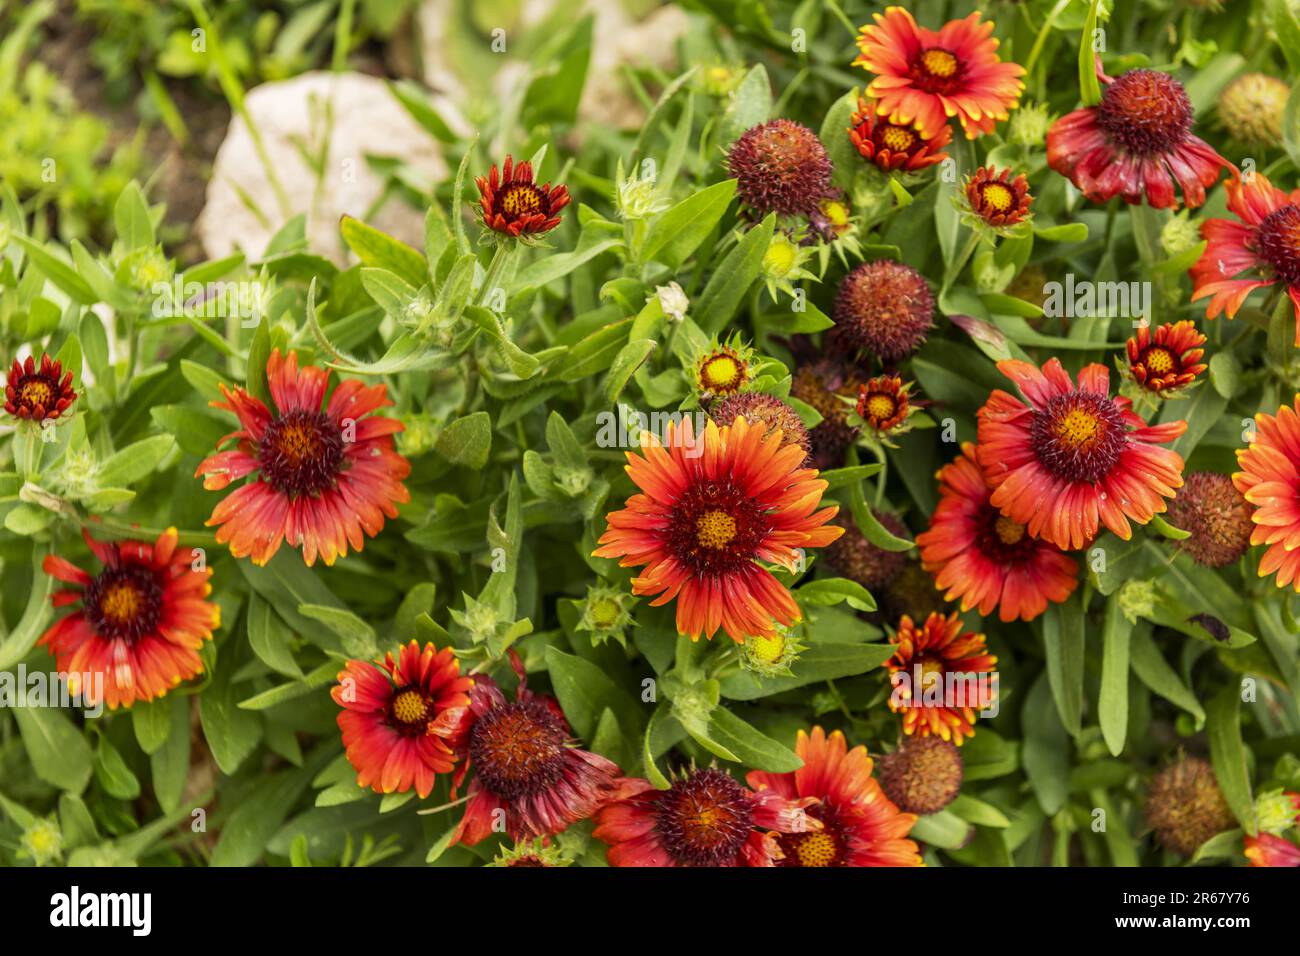 From the Asteraceae family, gazania is a perennial plant whose flowering begins in spring to fully explode in the summer months and stabilize, in many Stock Photo